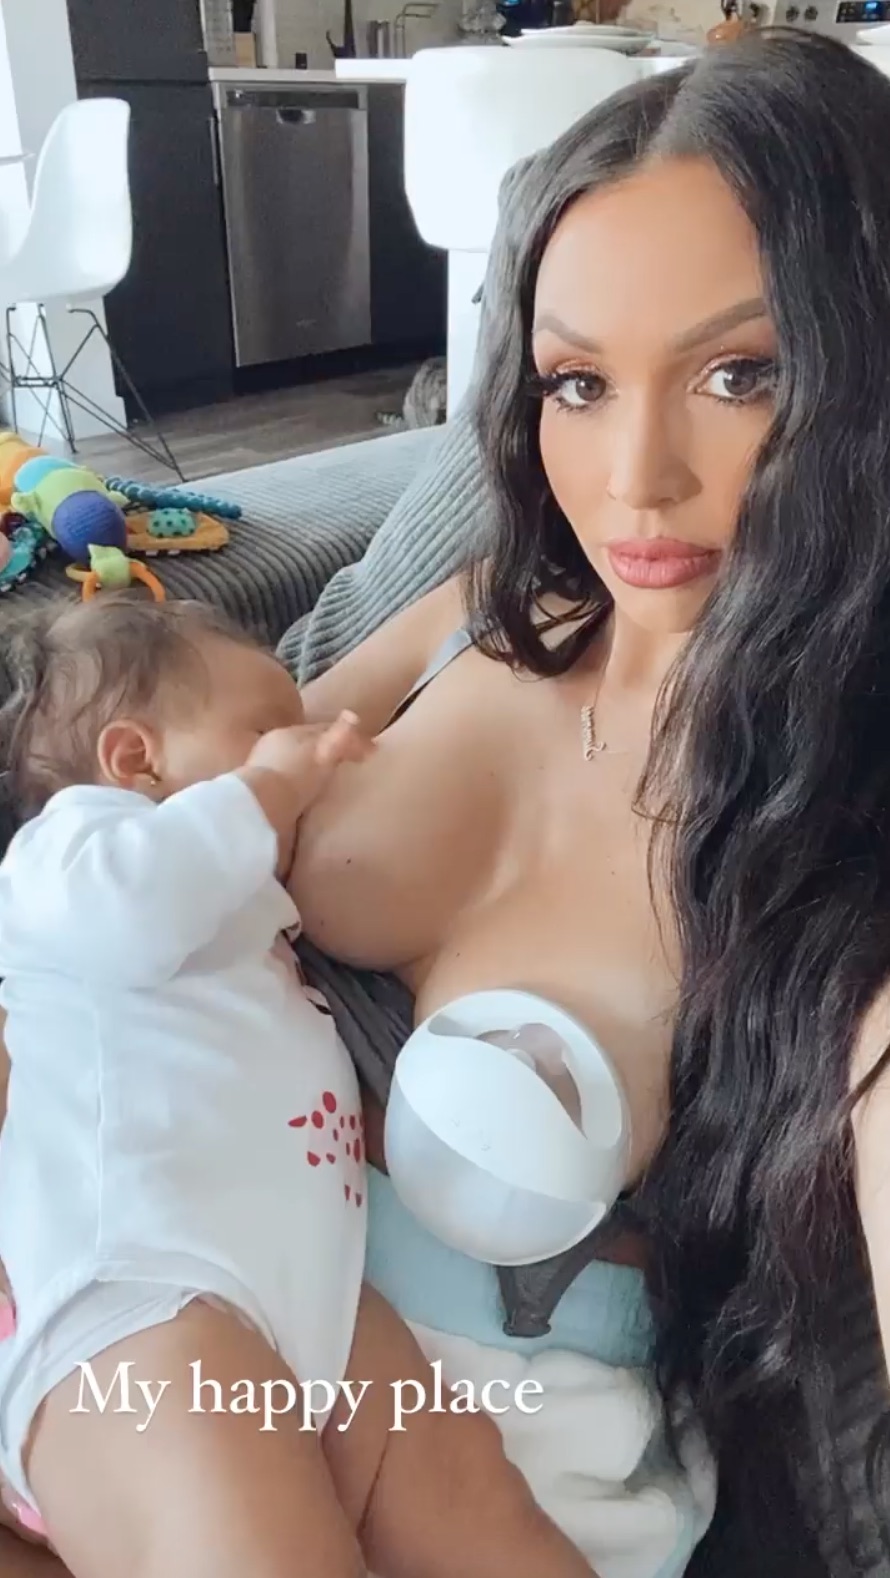 Pump Rules' Scheana Shay Shares Breast-Feeding Pic: 'My Happy Place'